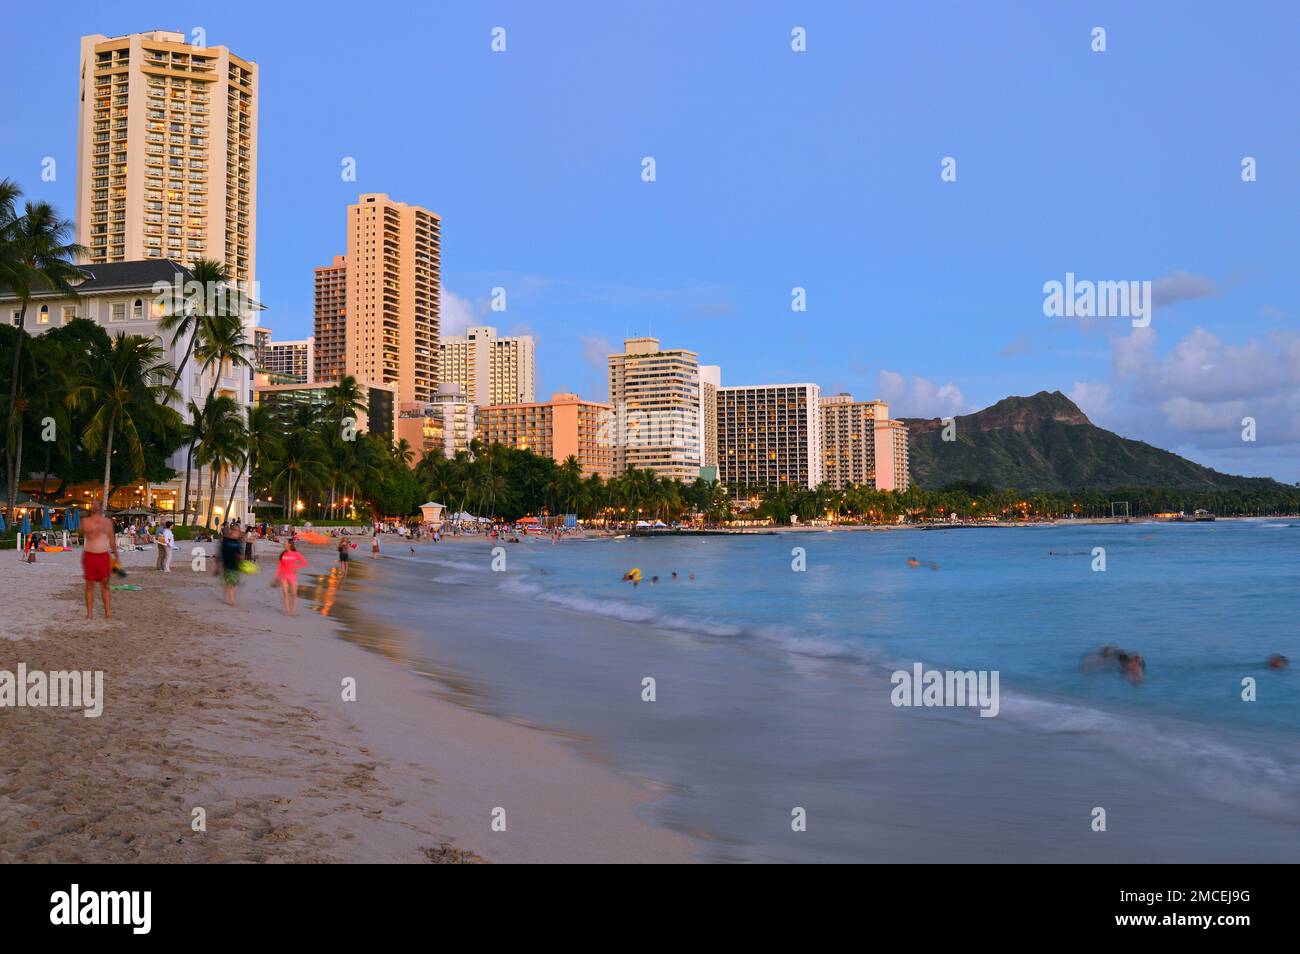 Dusk settles on the people and tides of Waikiki Beach, Diamond Head and the Pacific Ocean in Hawaii Stock Photo